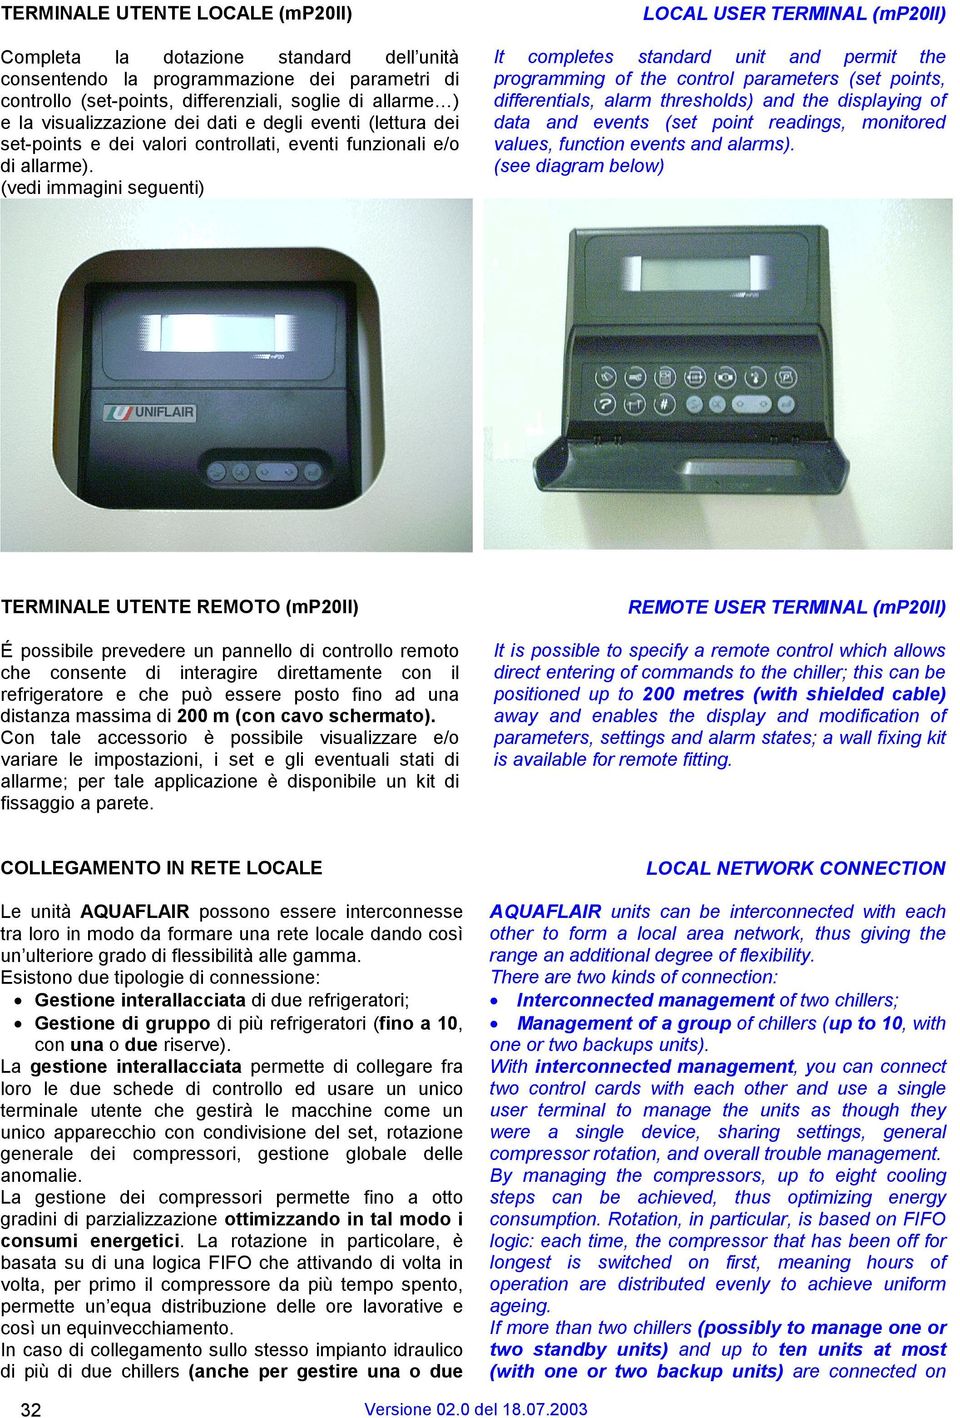 (vedi immagini seguenti) It completes standard unit and permit the programming of the control parameters (set points, differentials, alarm thresholds) and the displaying of data and events (set point